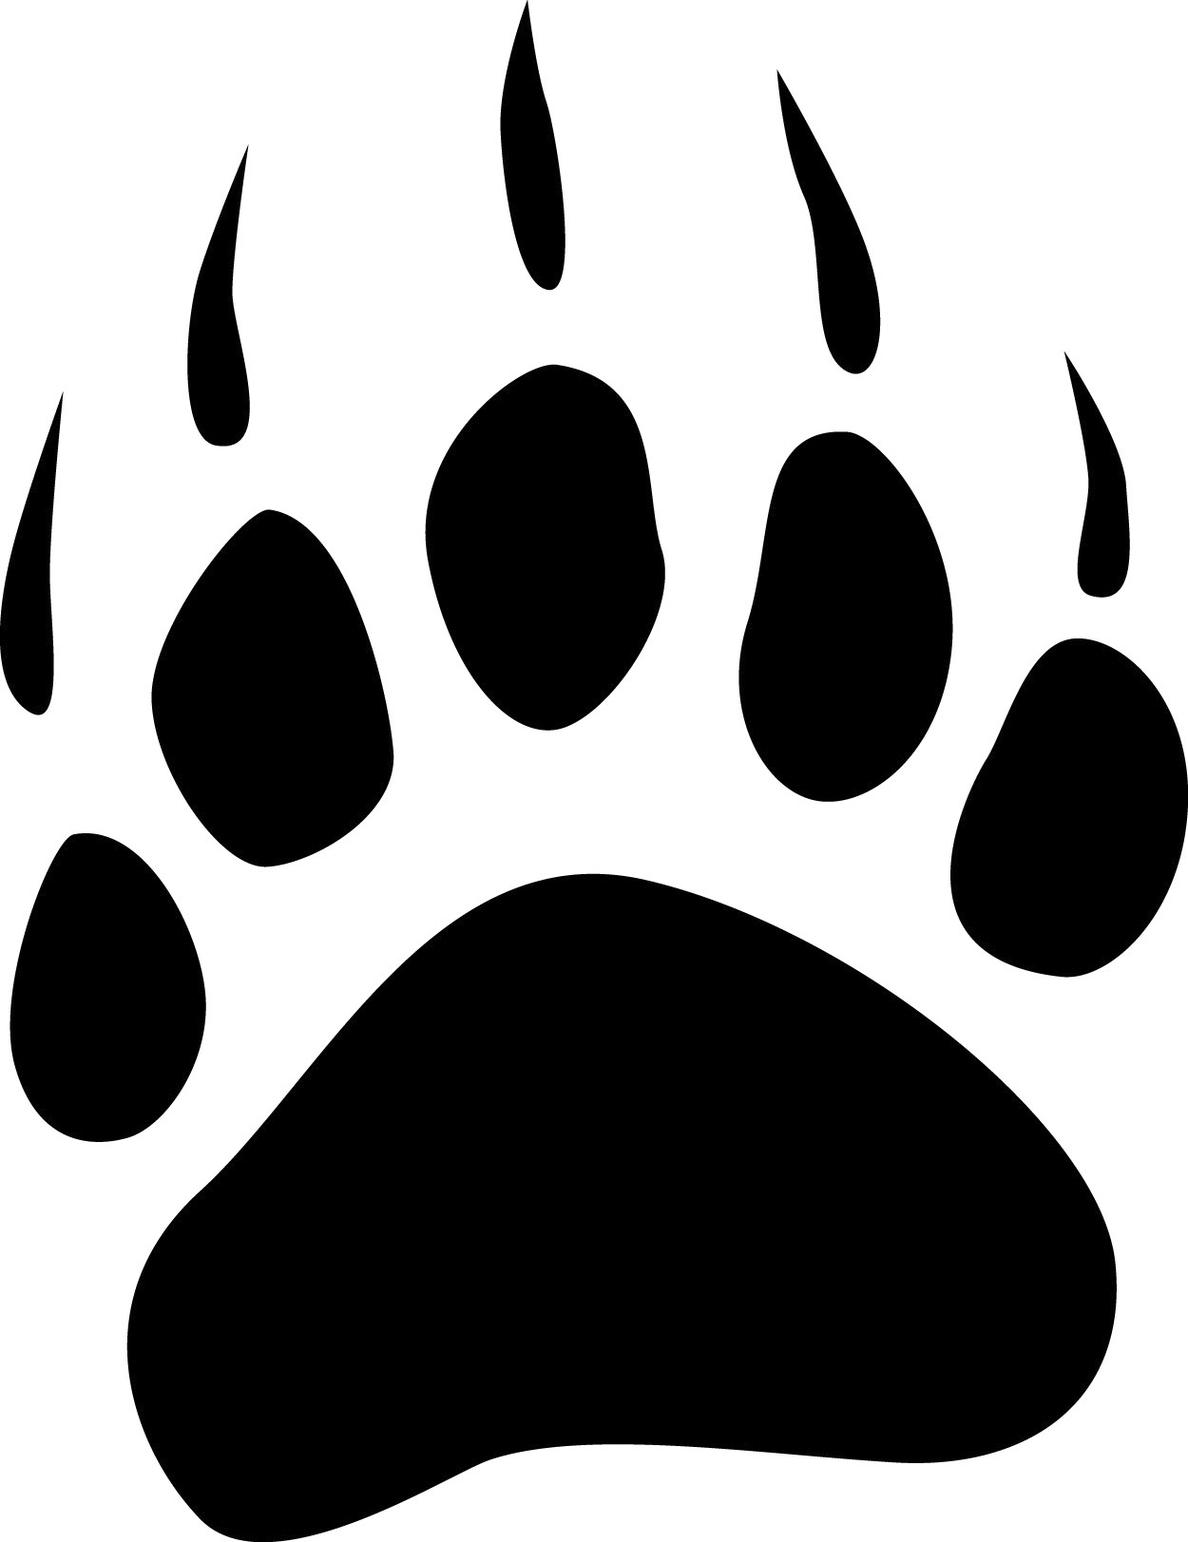 Black Paw Logo Clipart - Free to use Clip Art Resource